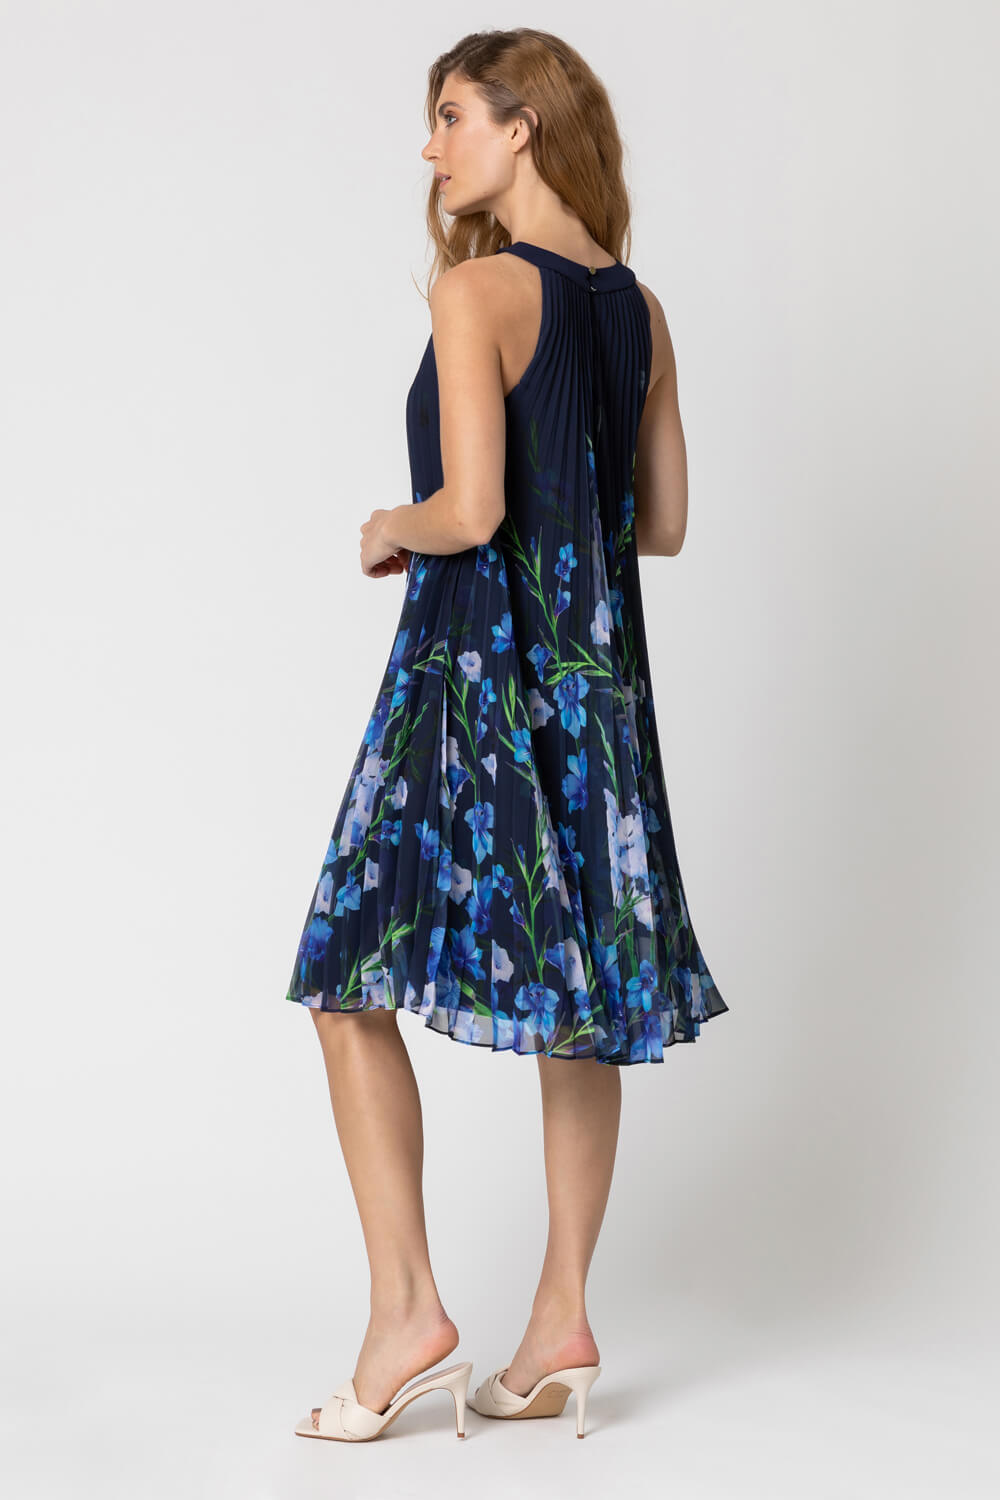 Blue High Neck Floral Pleated Swing Dress, Image 2 of 4